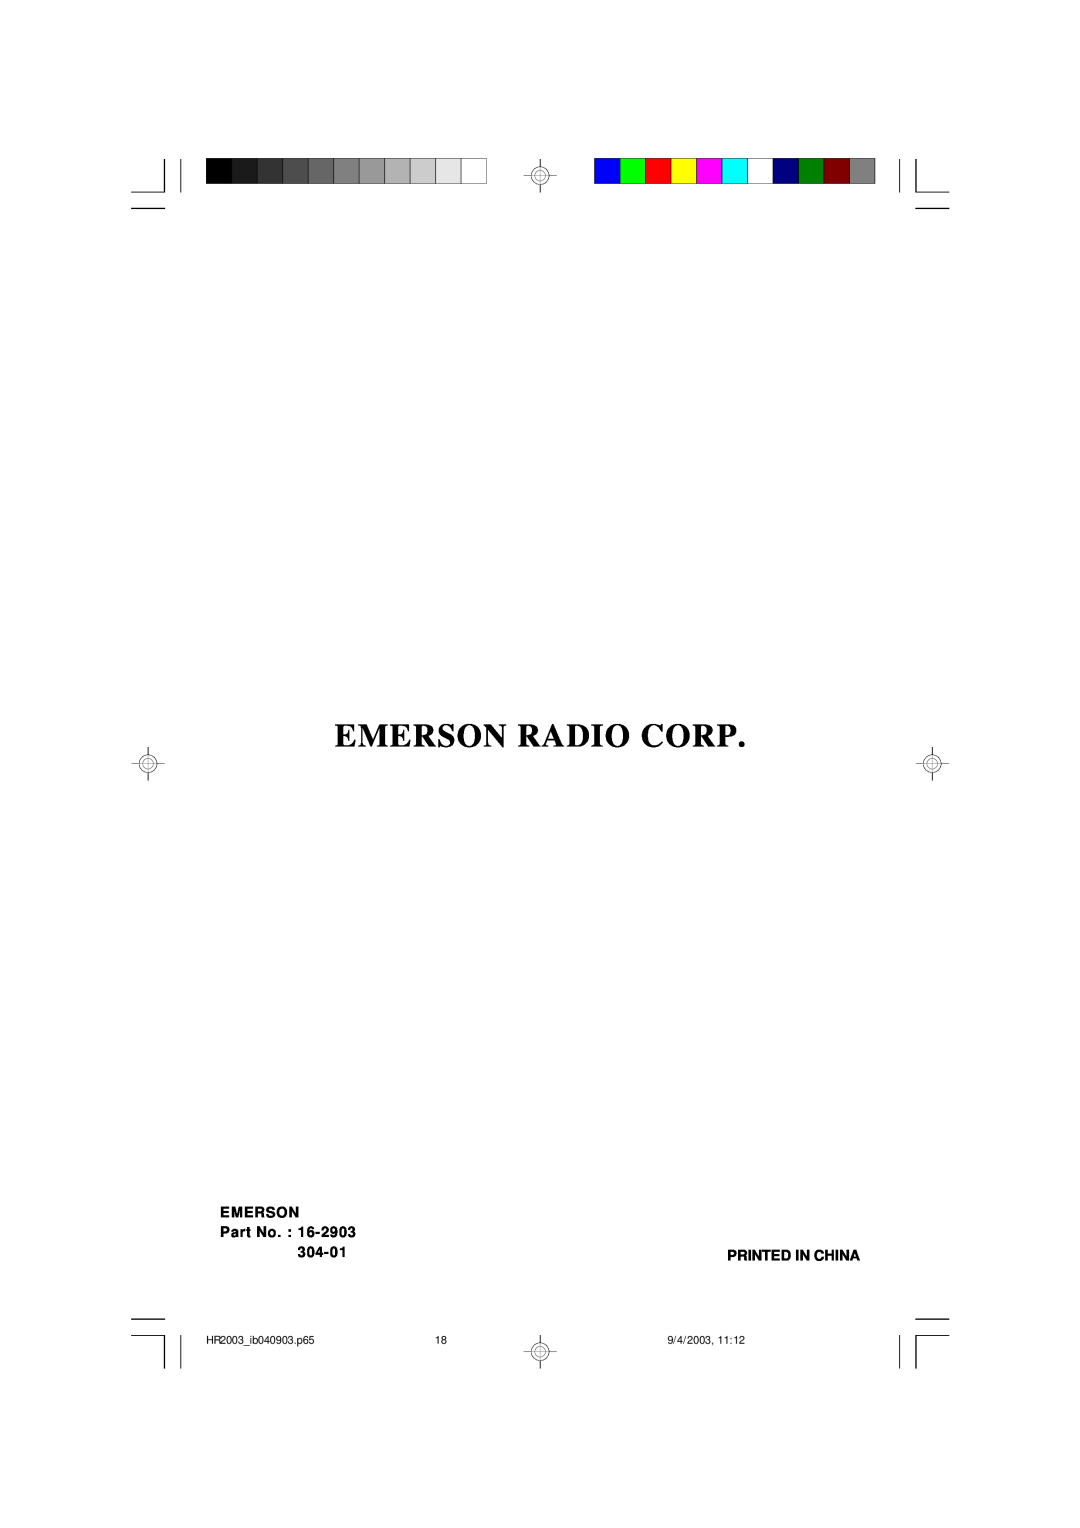 Emerson owner manual Emerson Radio Corp, Part No, 304-01, Printed In China, HR2003_ib040903.p65, 9/4/2003, 11:12 